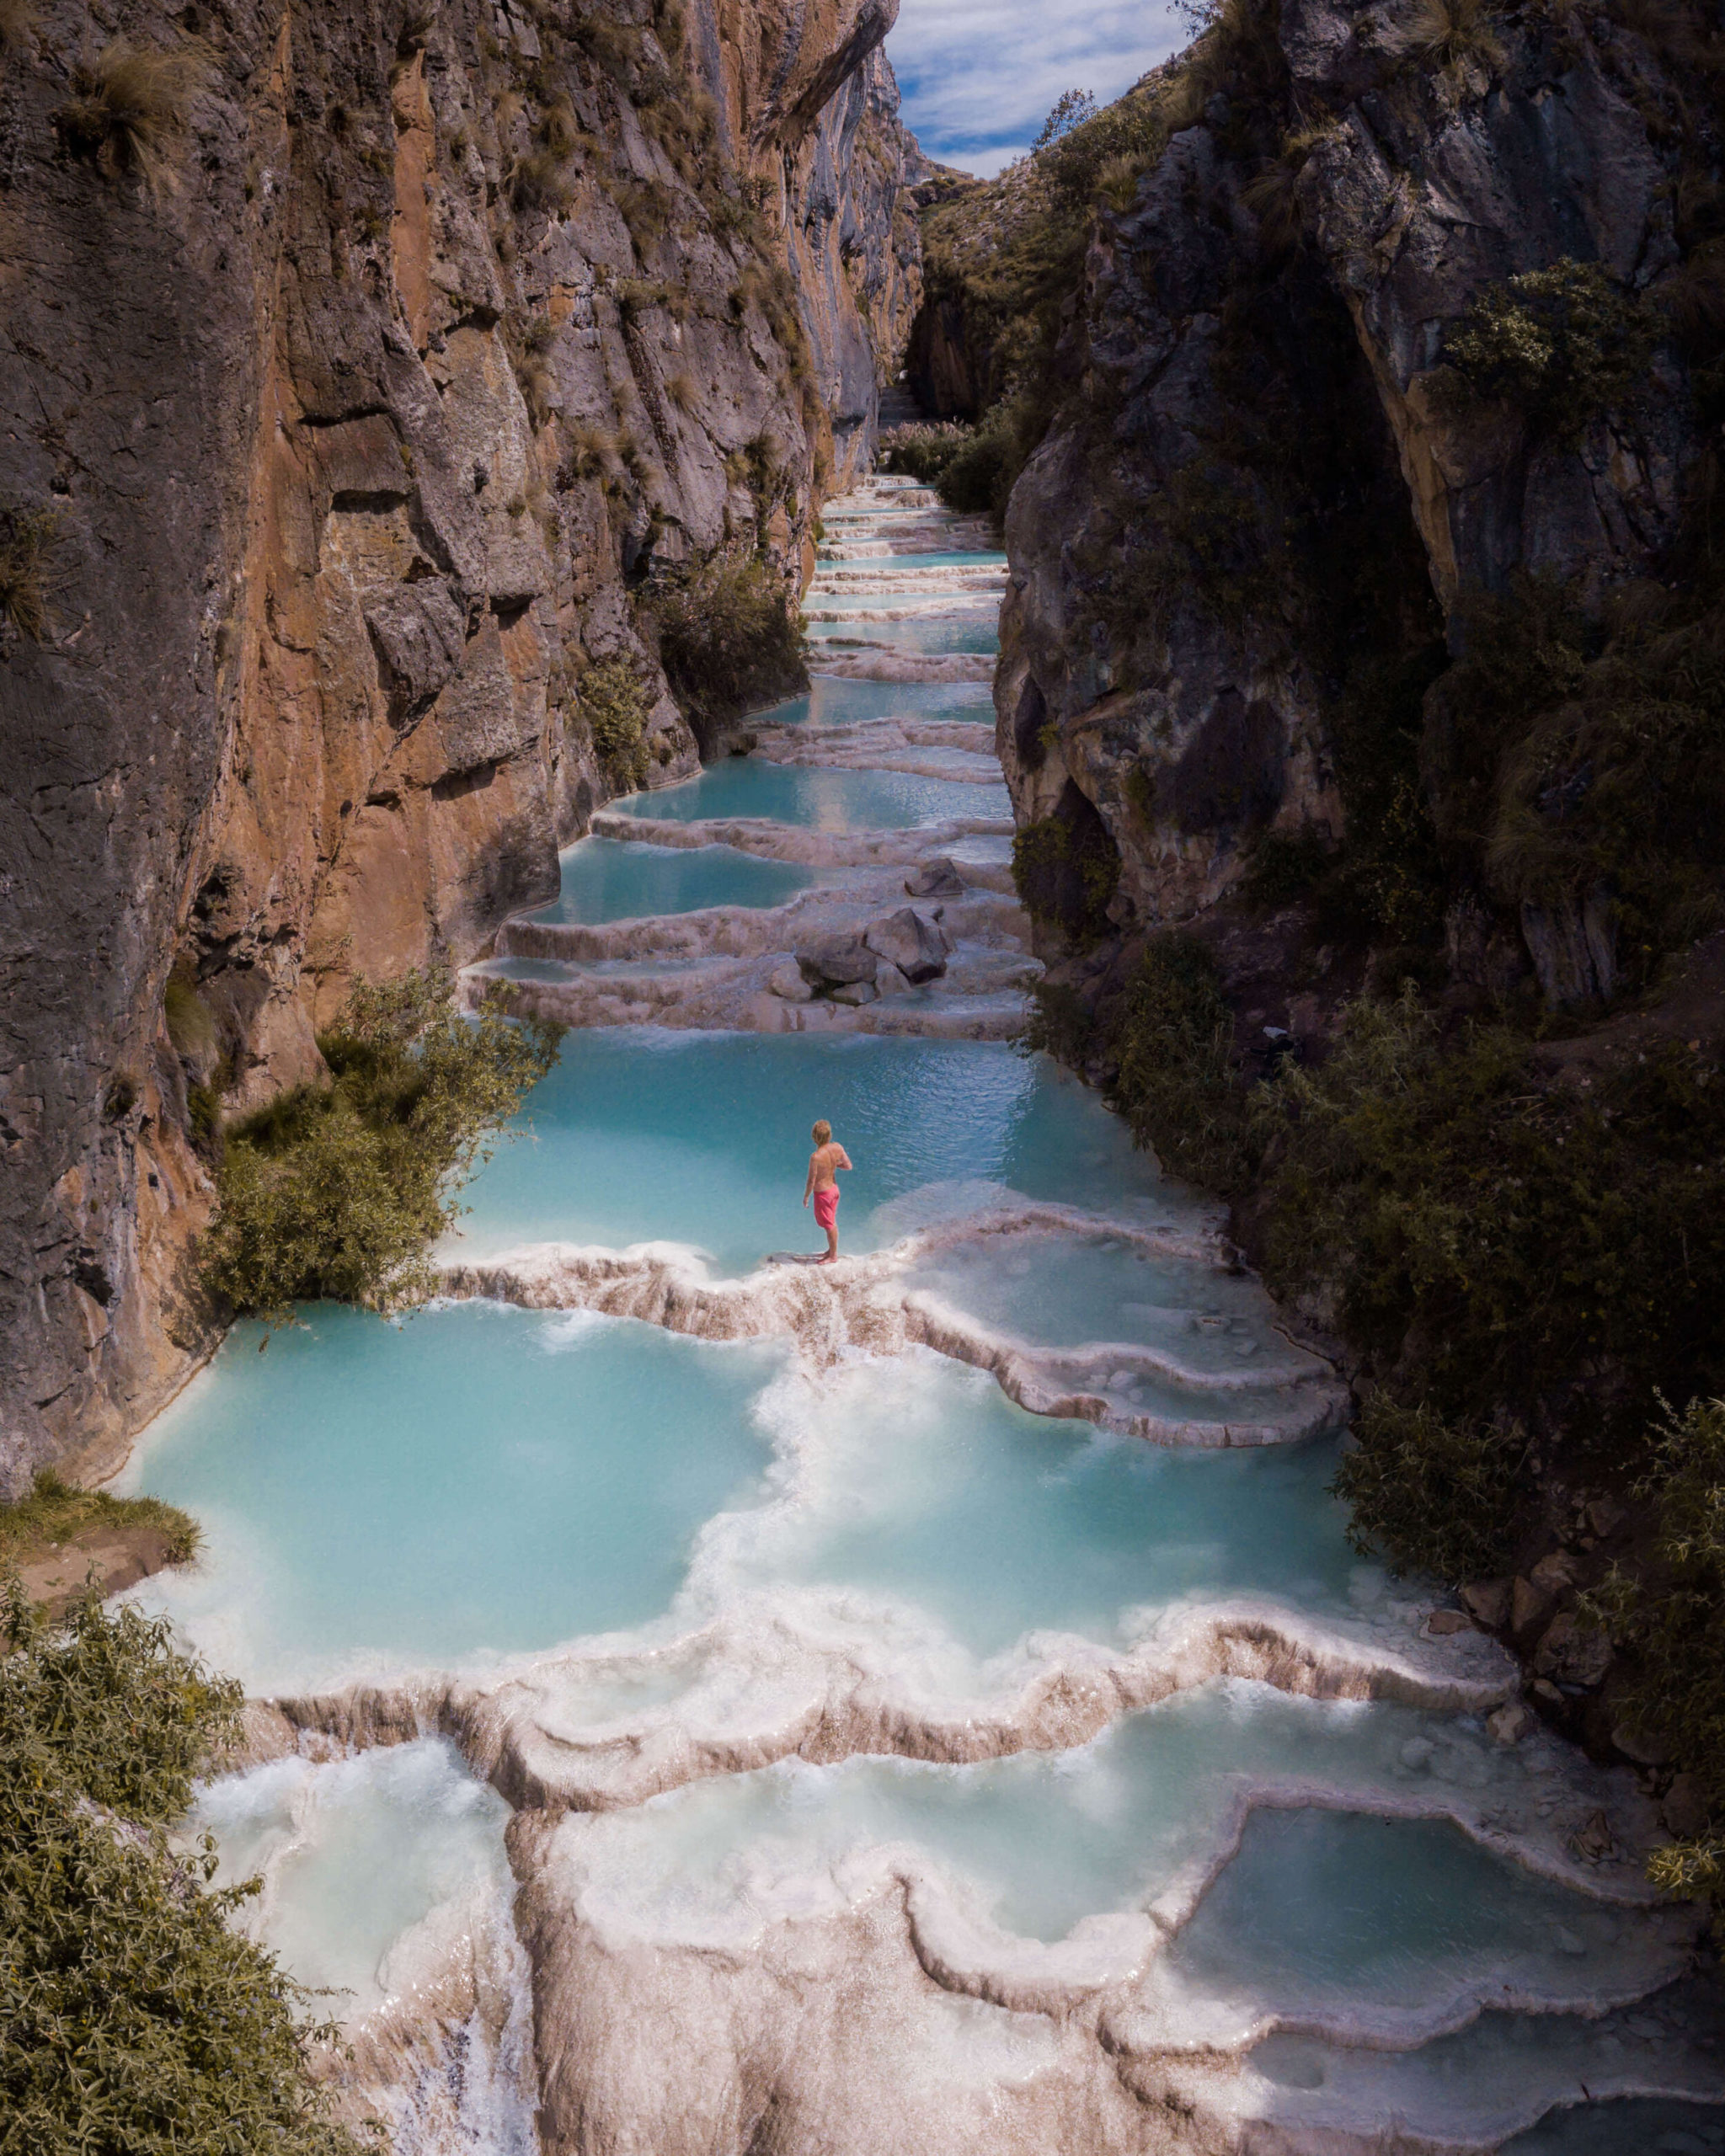 Quin was lucky enough to travel to Peru last year as well, and while he was there he took this photo of Aguas Turquesas with blue water. Trust me when I tell you that it looked nothing like that when we went in March!